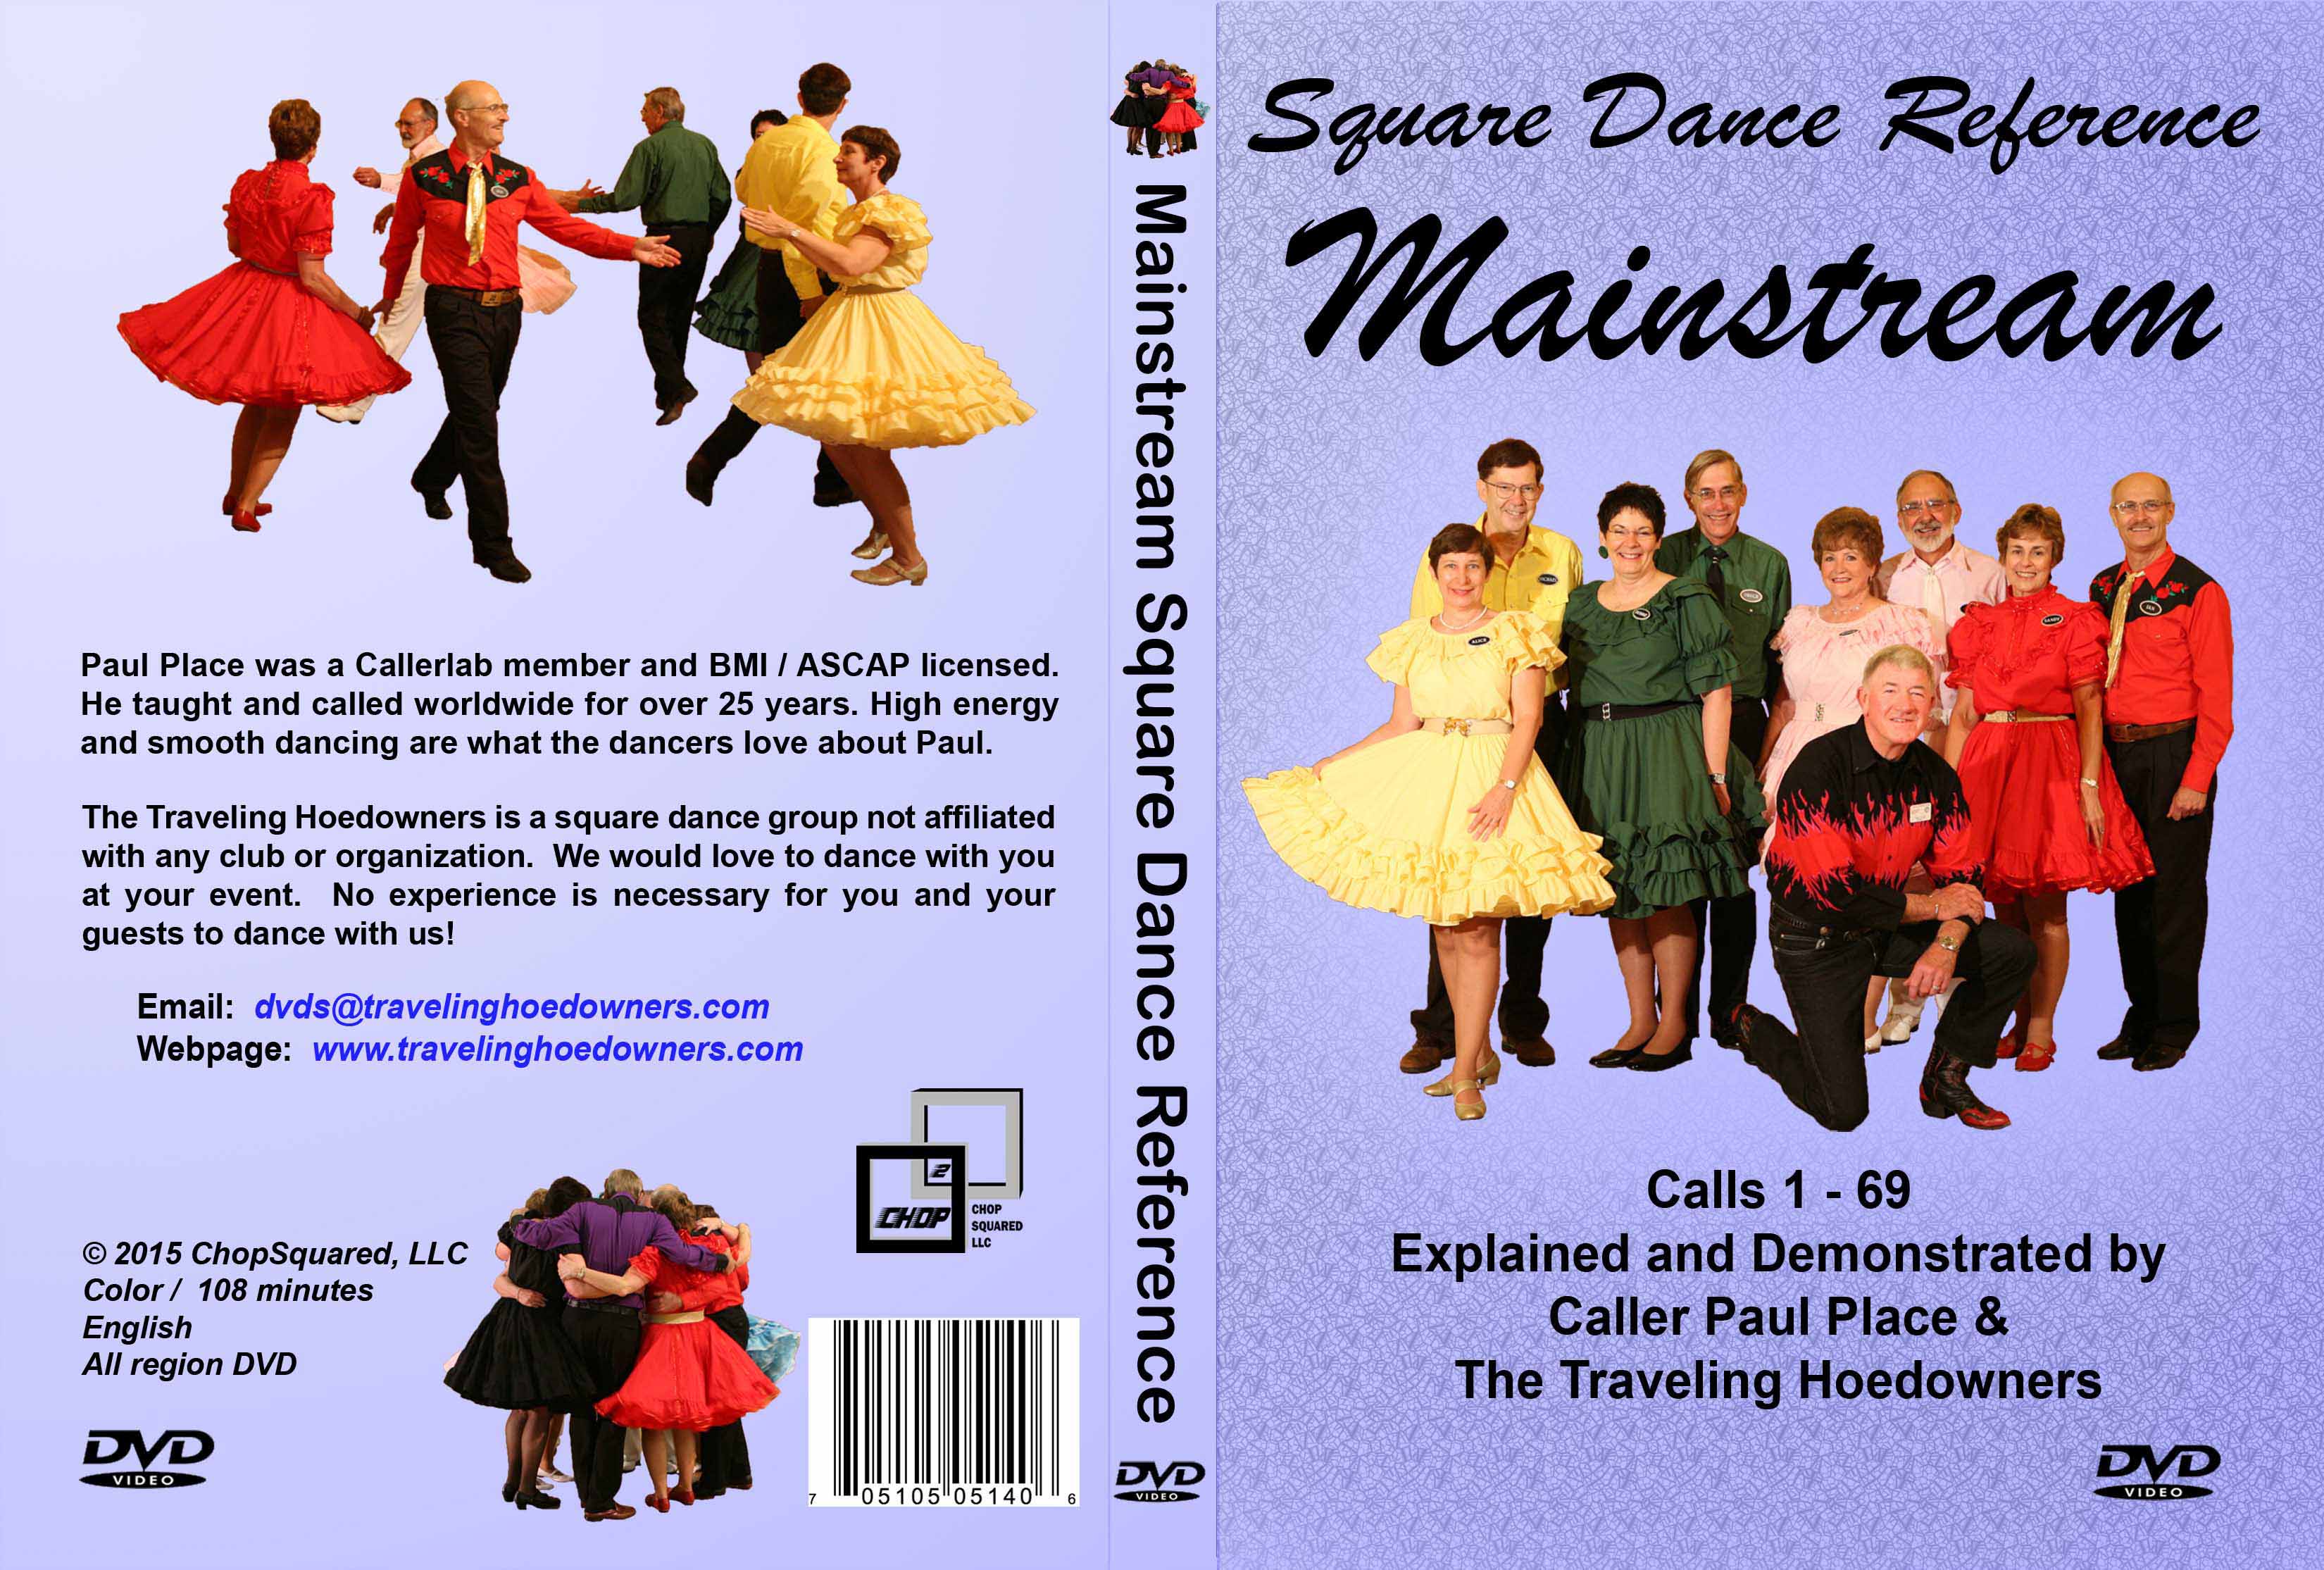 Mainstream Reference DVD Jacket